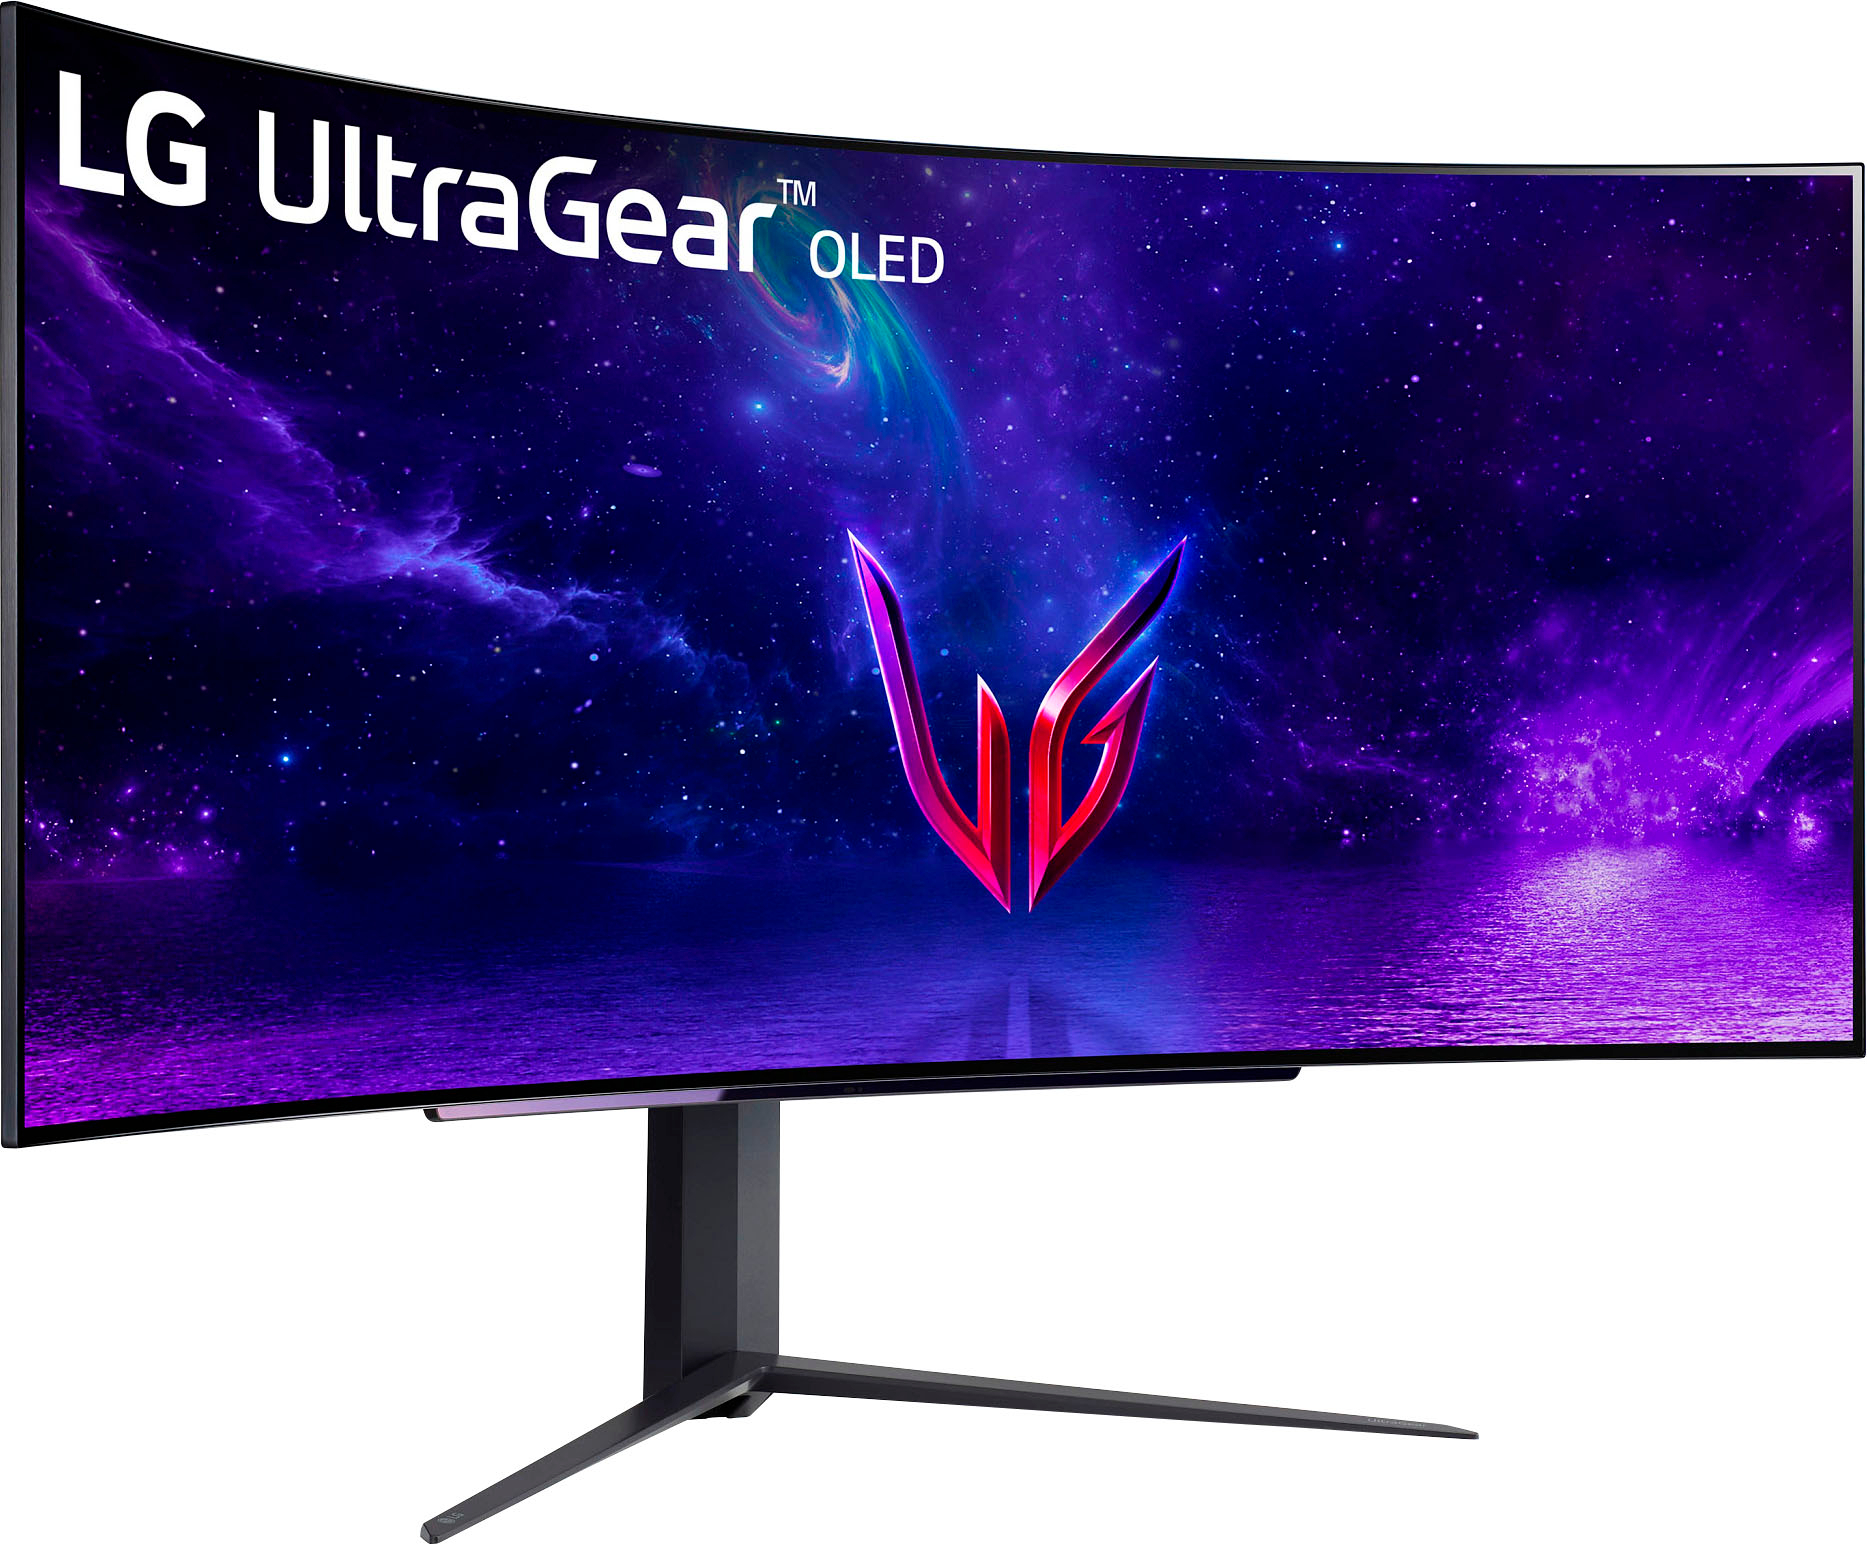 4K Monitor Vs Gaming Monitor: Which Is Best for Most People?